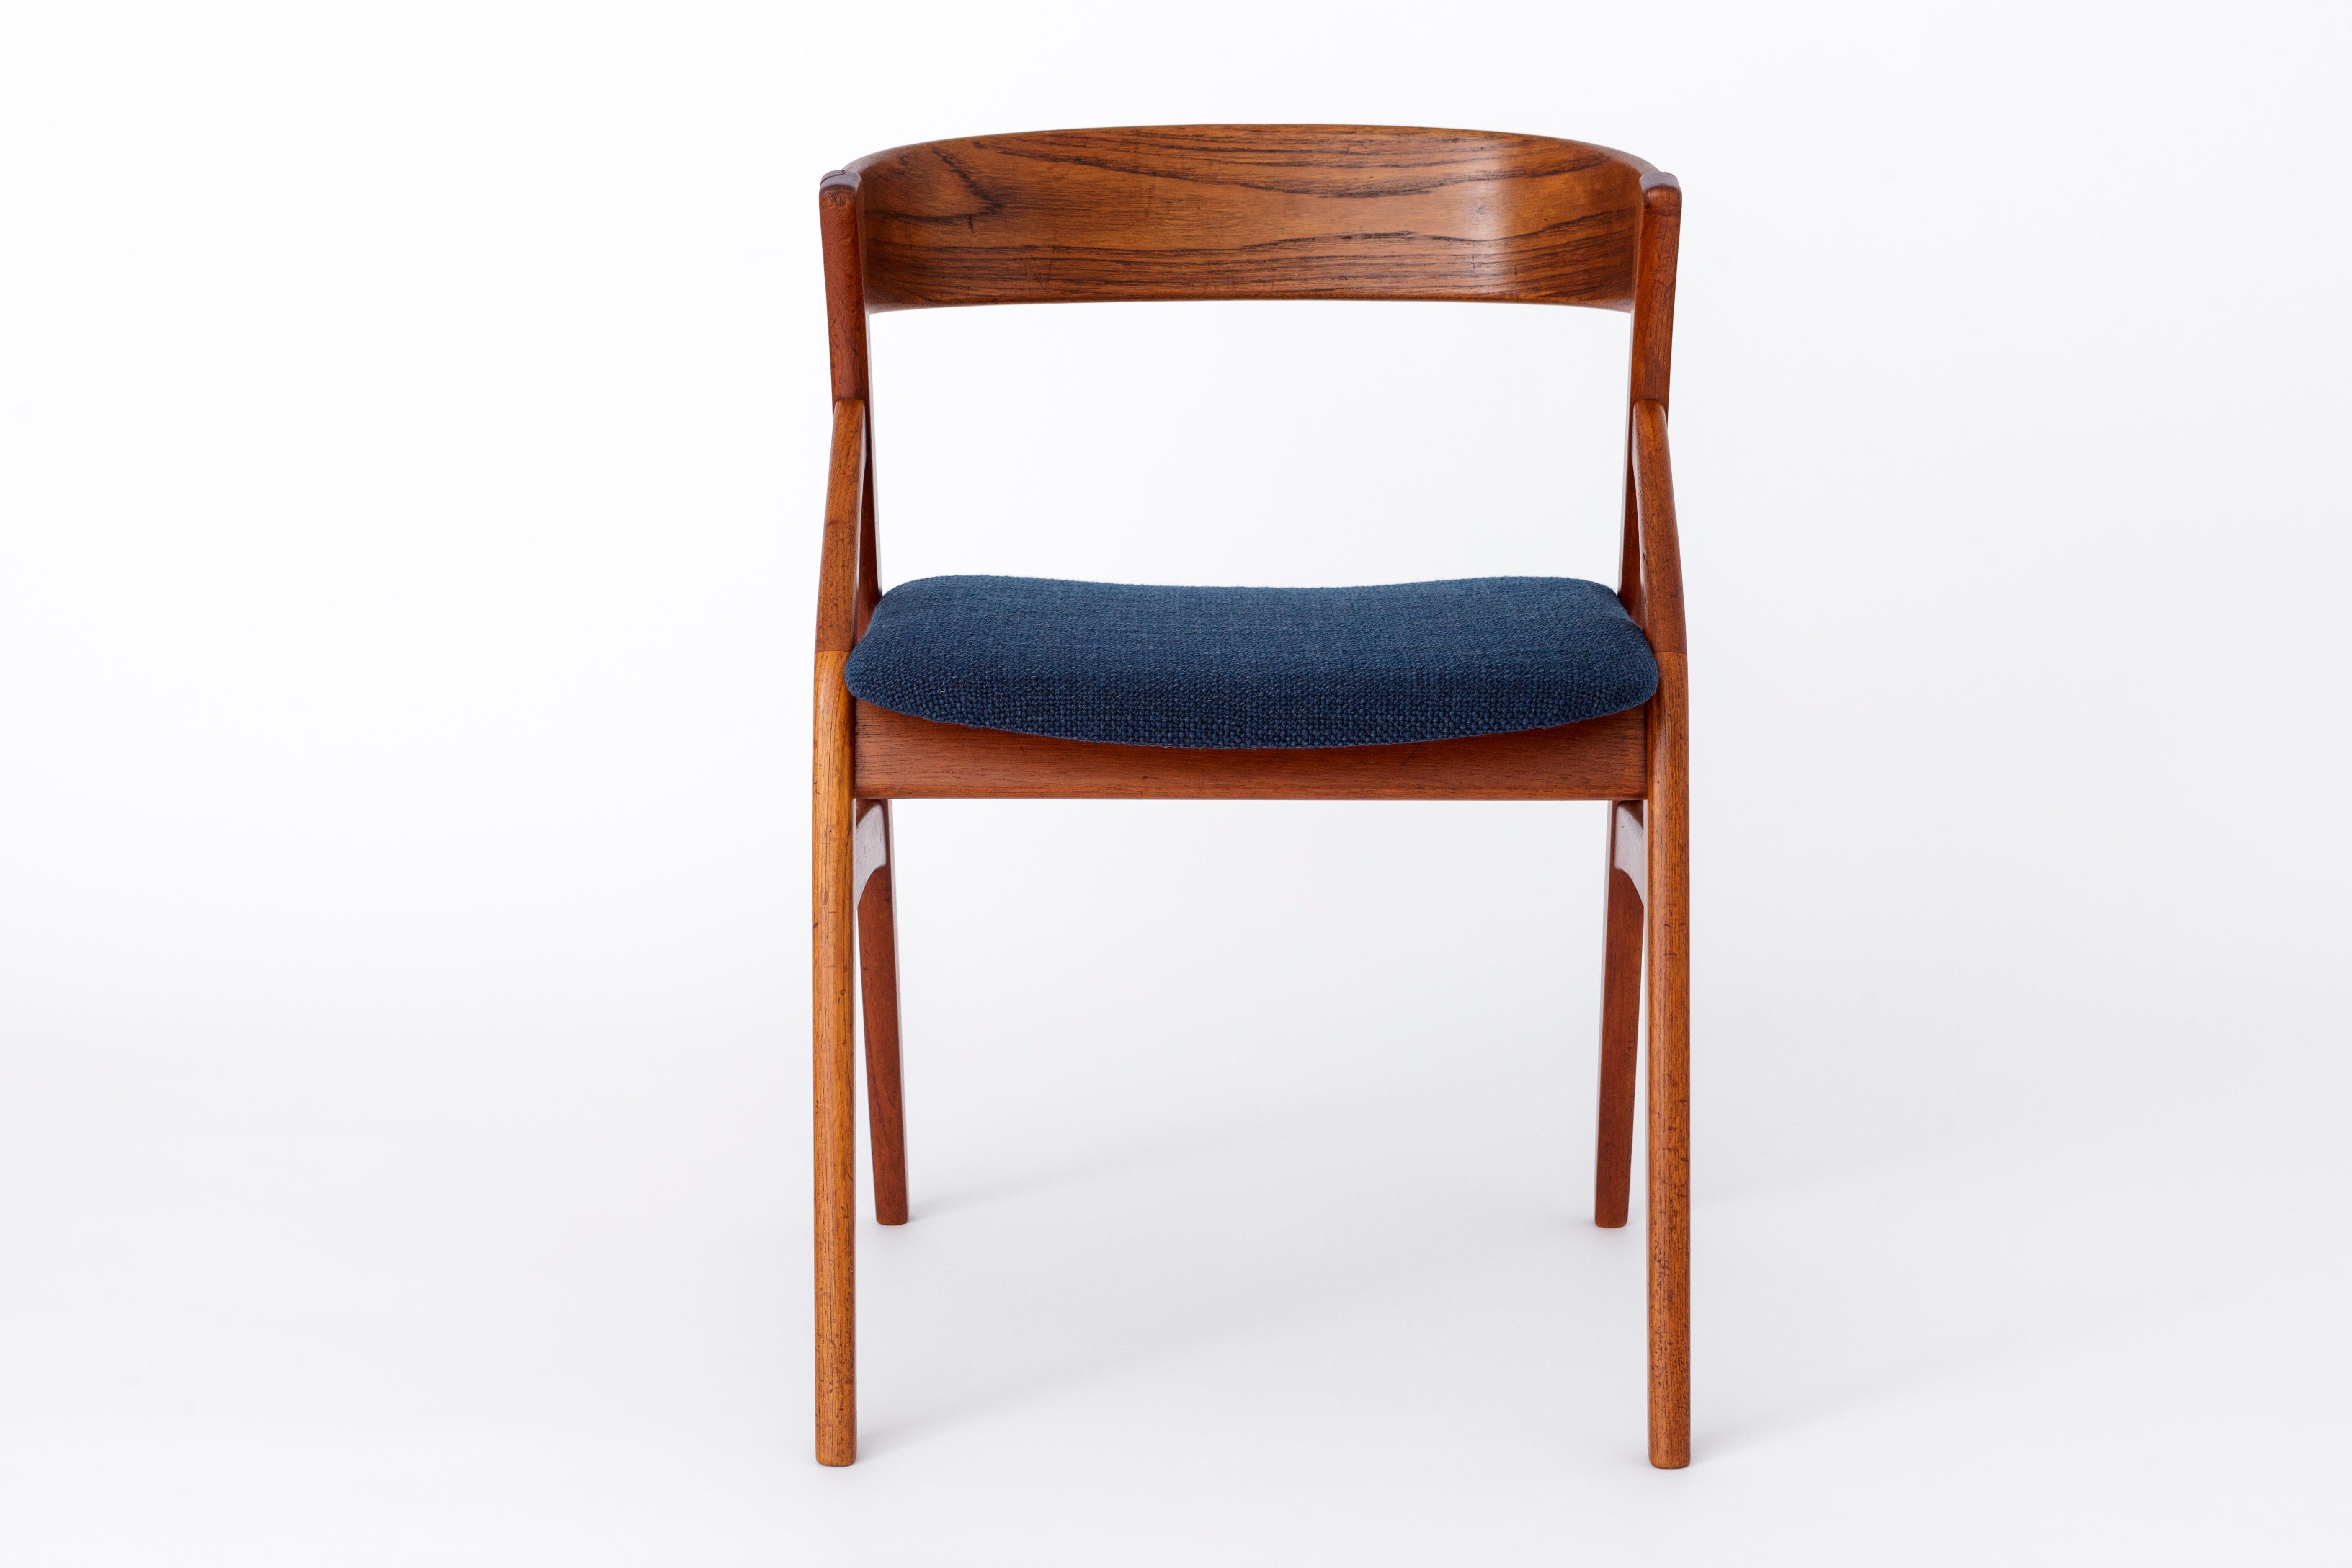 Vintage chair by manufacturer Dyrlund, Denmark. 
Production period: 1960s. 

Chair frame was repaired in the back area. See photos. 
The chair frame is sturdy and the chair can be used without restrictions. 
Seat reupholstered with dark blue fabric. 